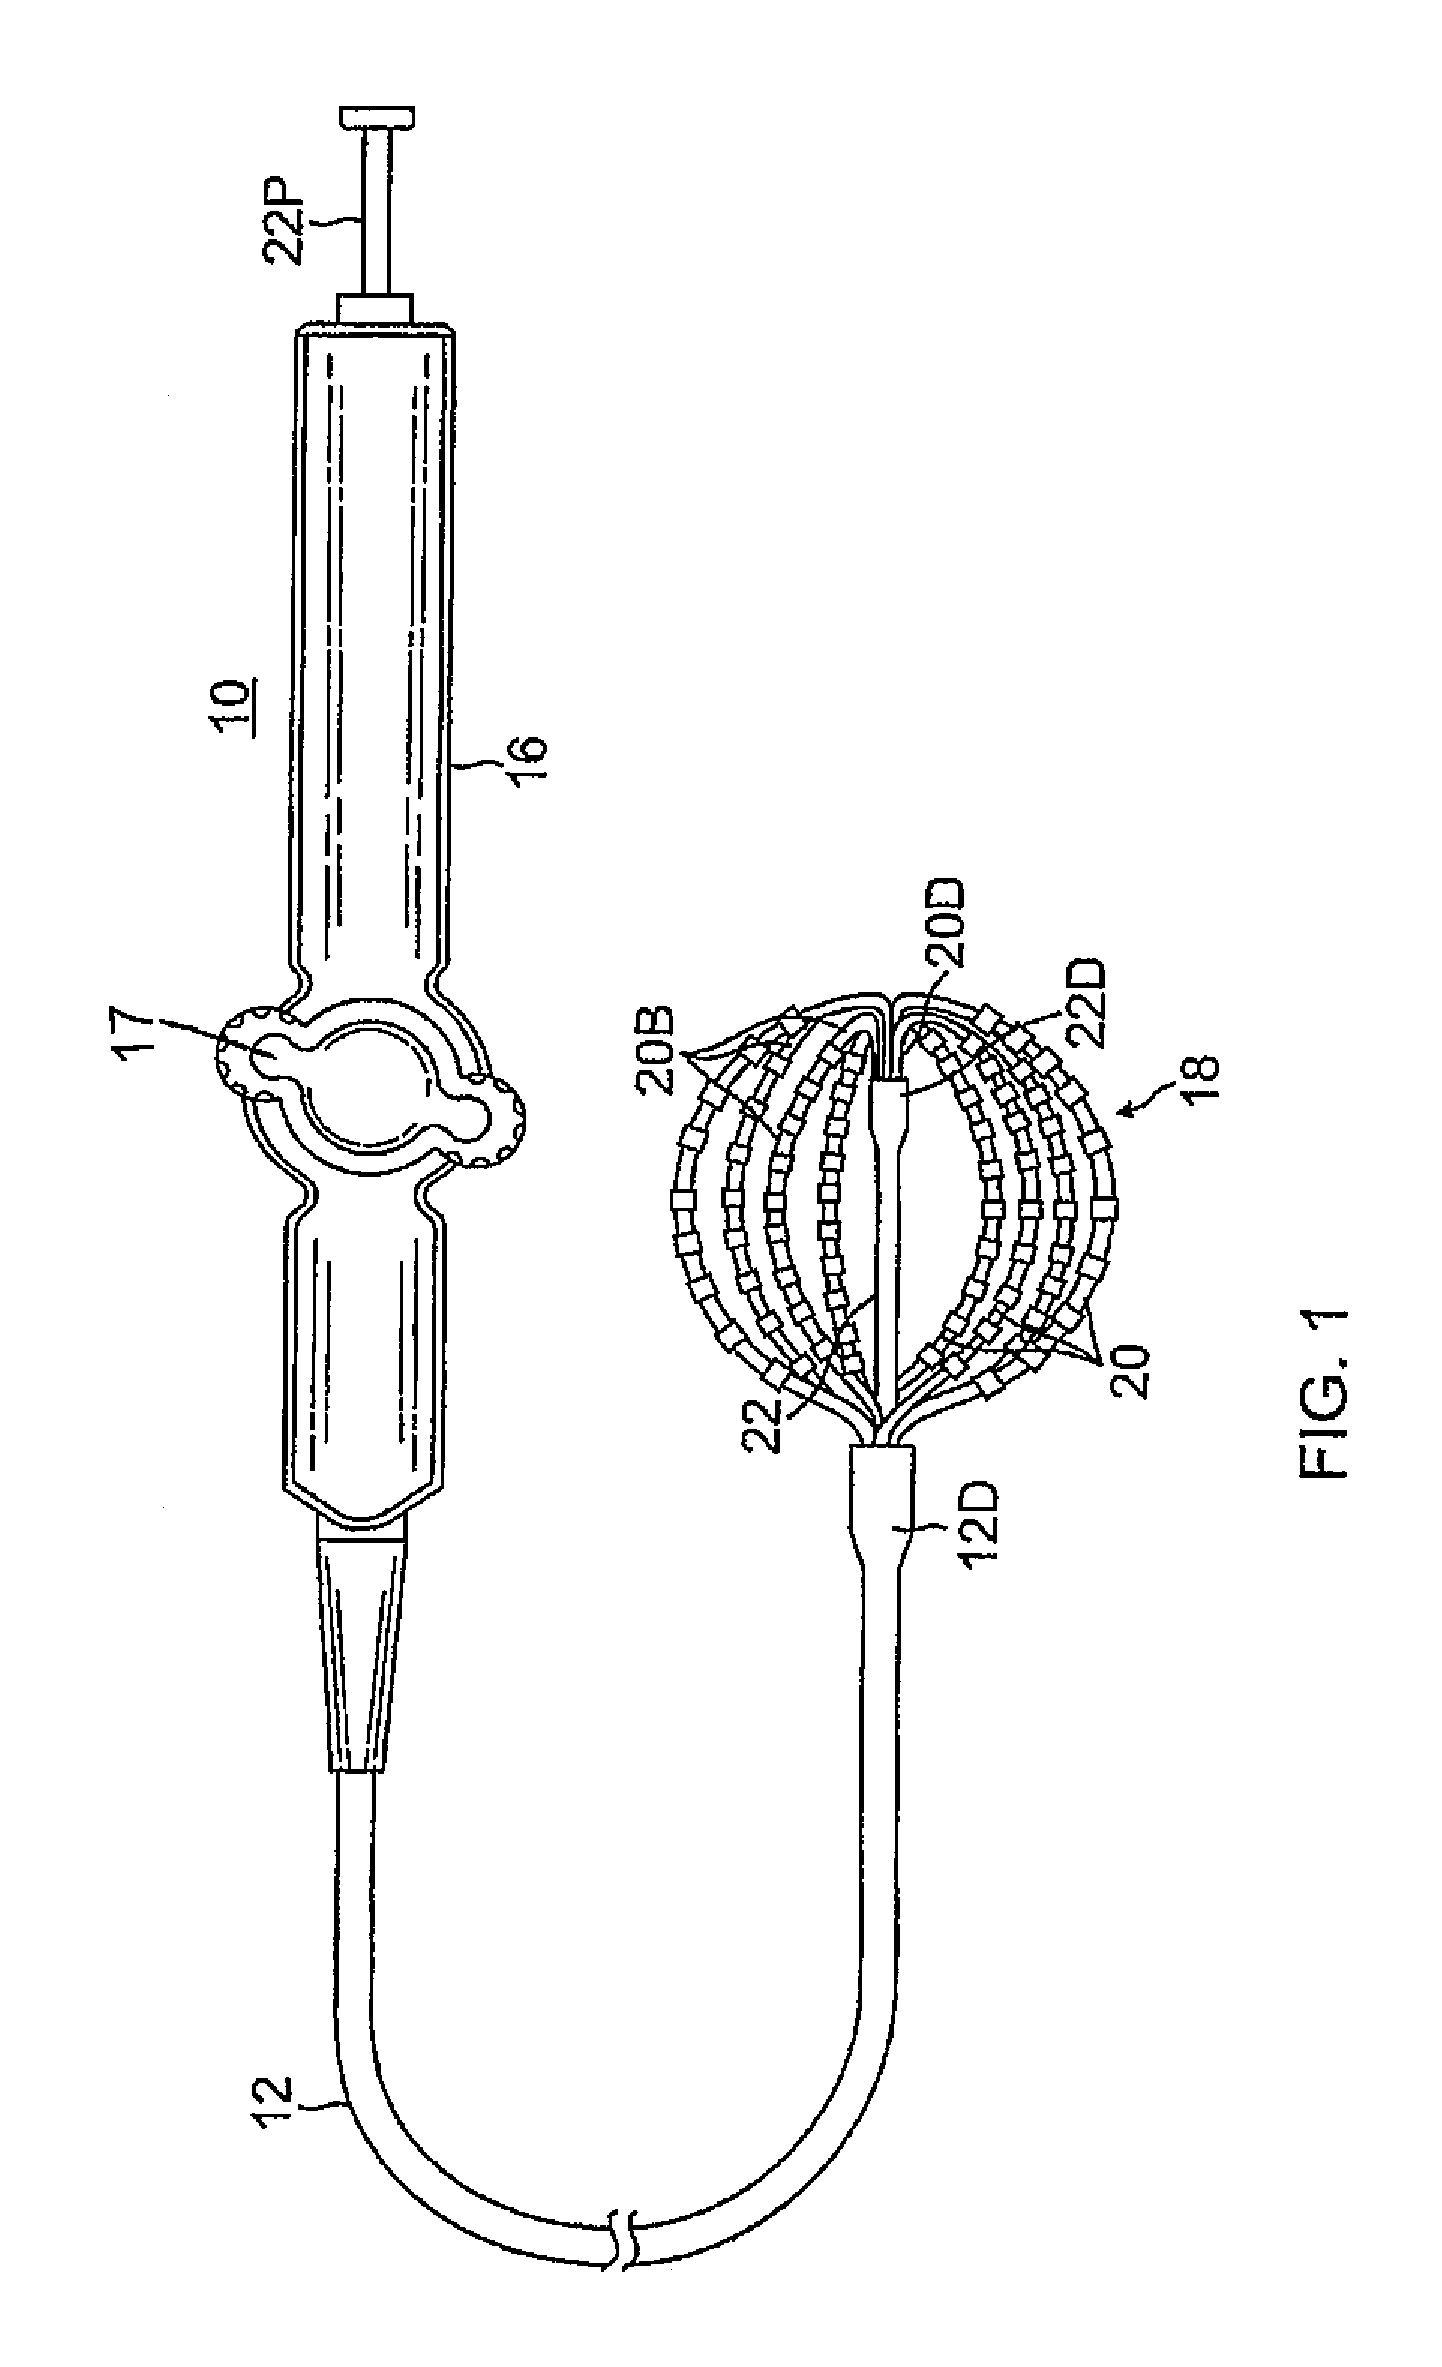 Basket catheter with deflectable spine